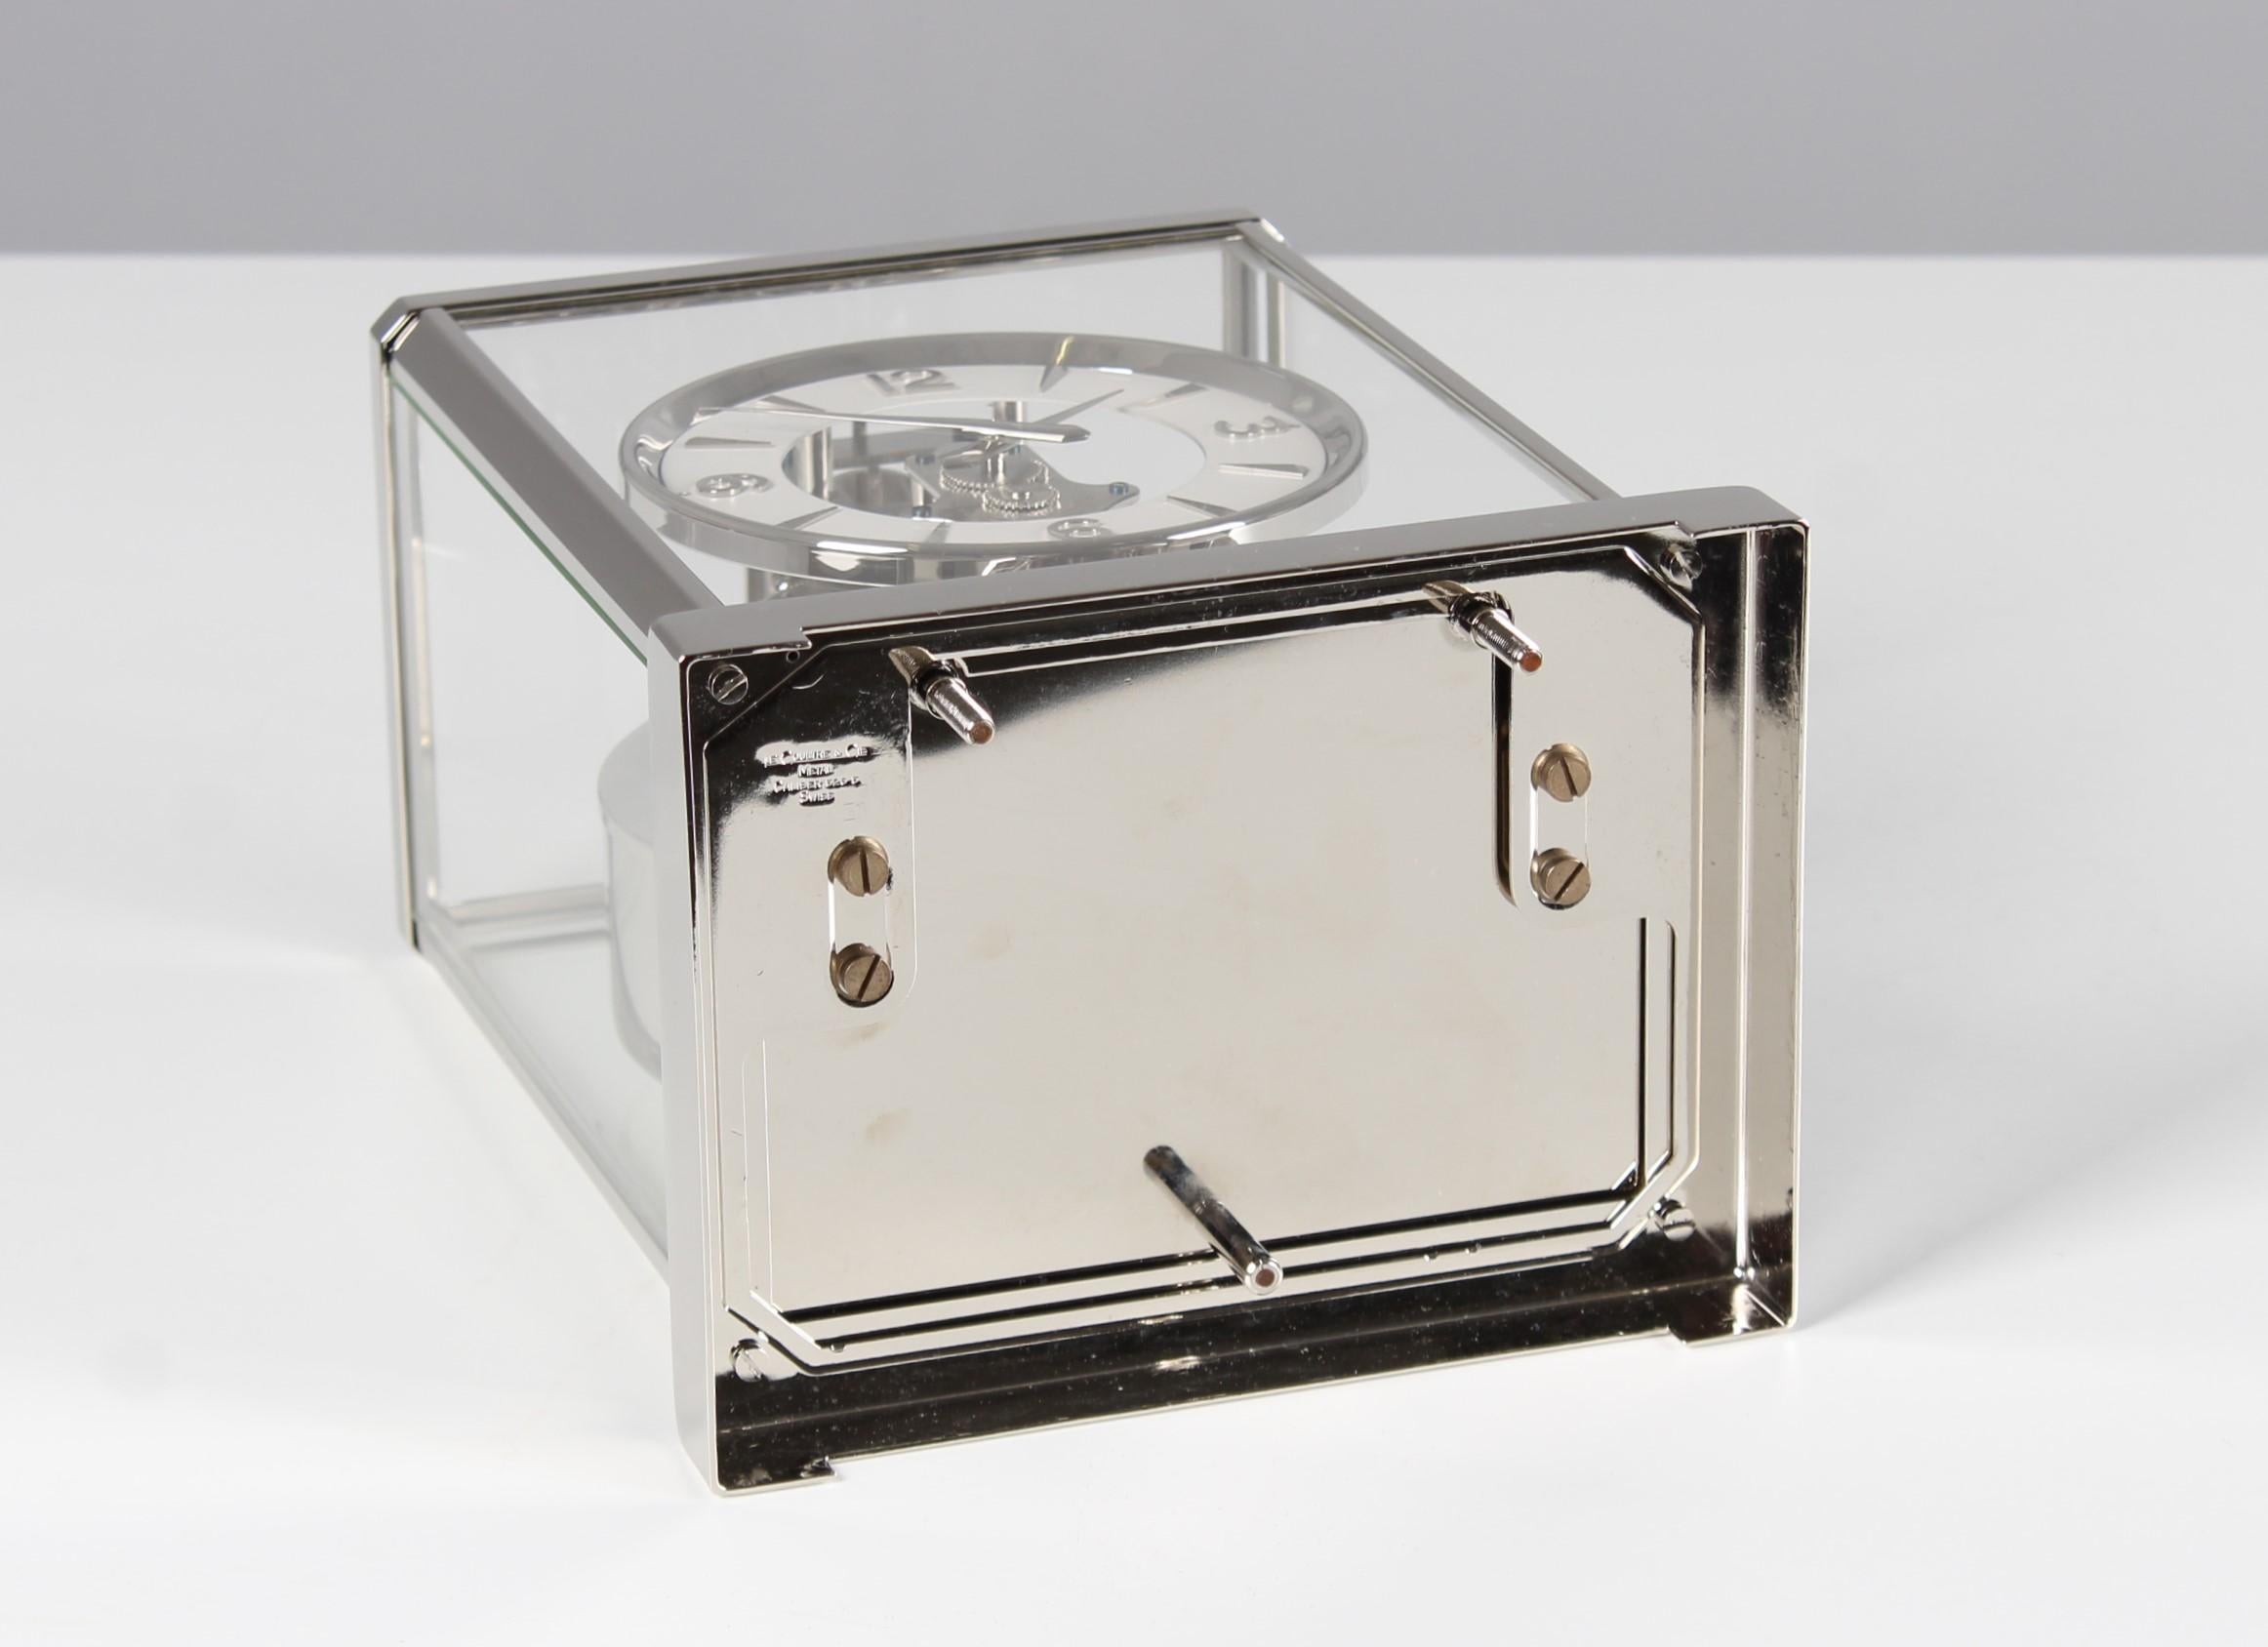 Jaeger LeCoultre, Silver Atmos Clock from 1955, Revised and New Nickel-Plated 6